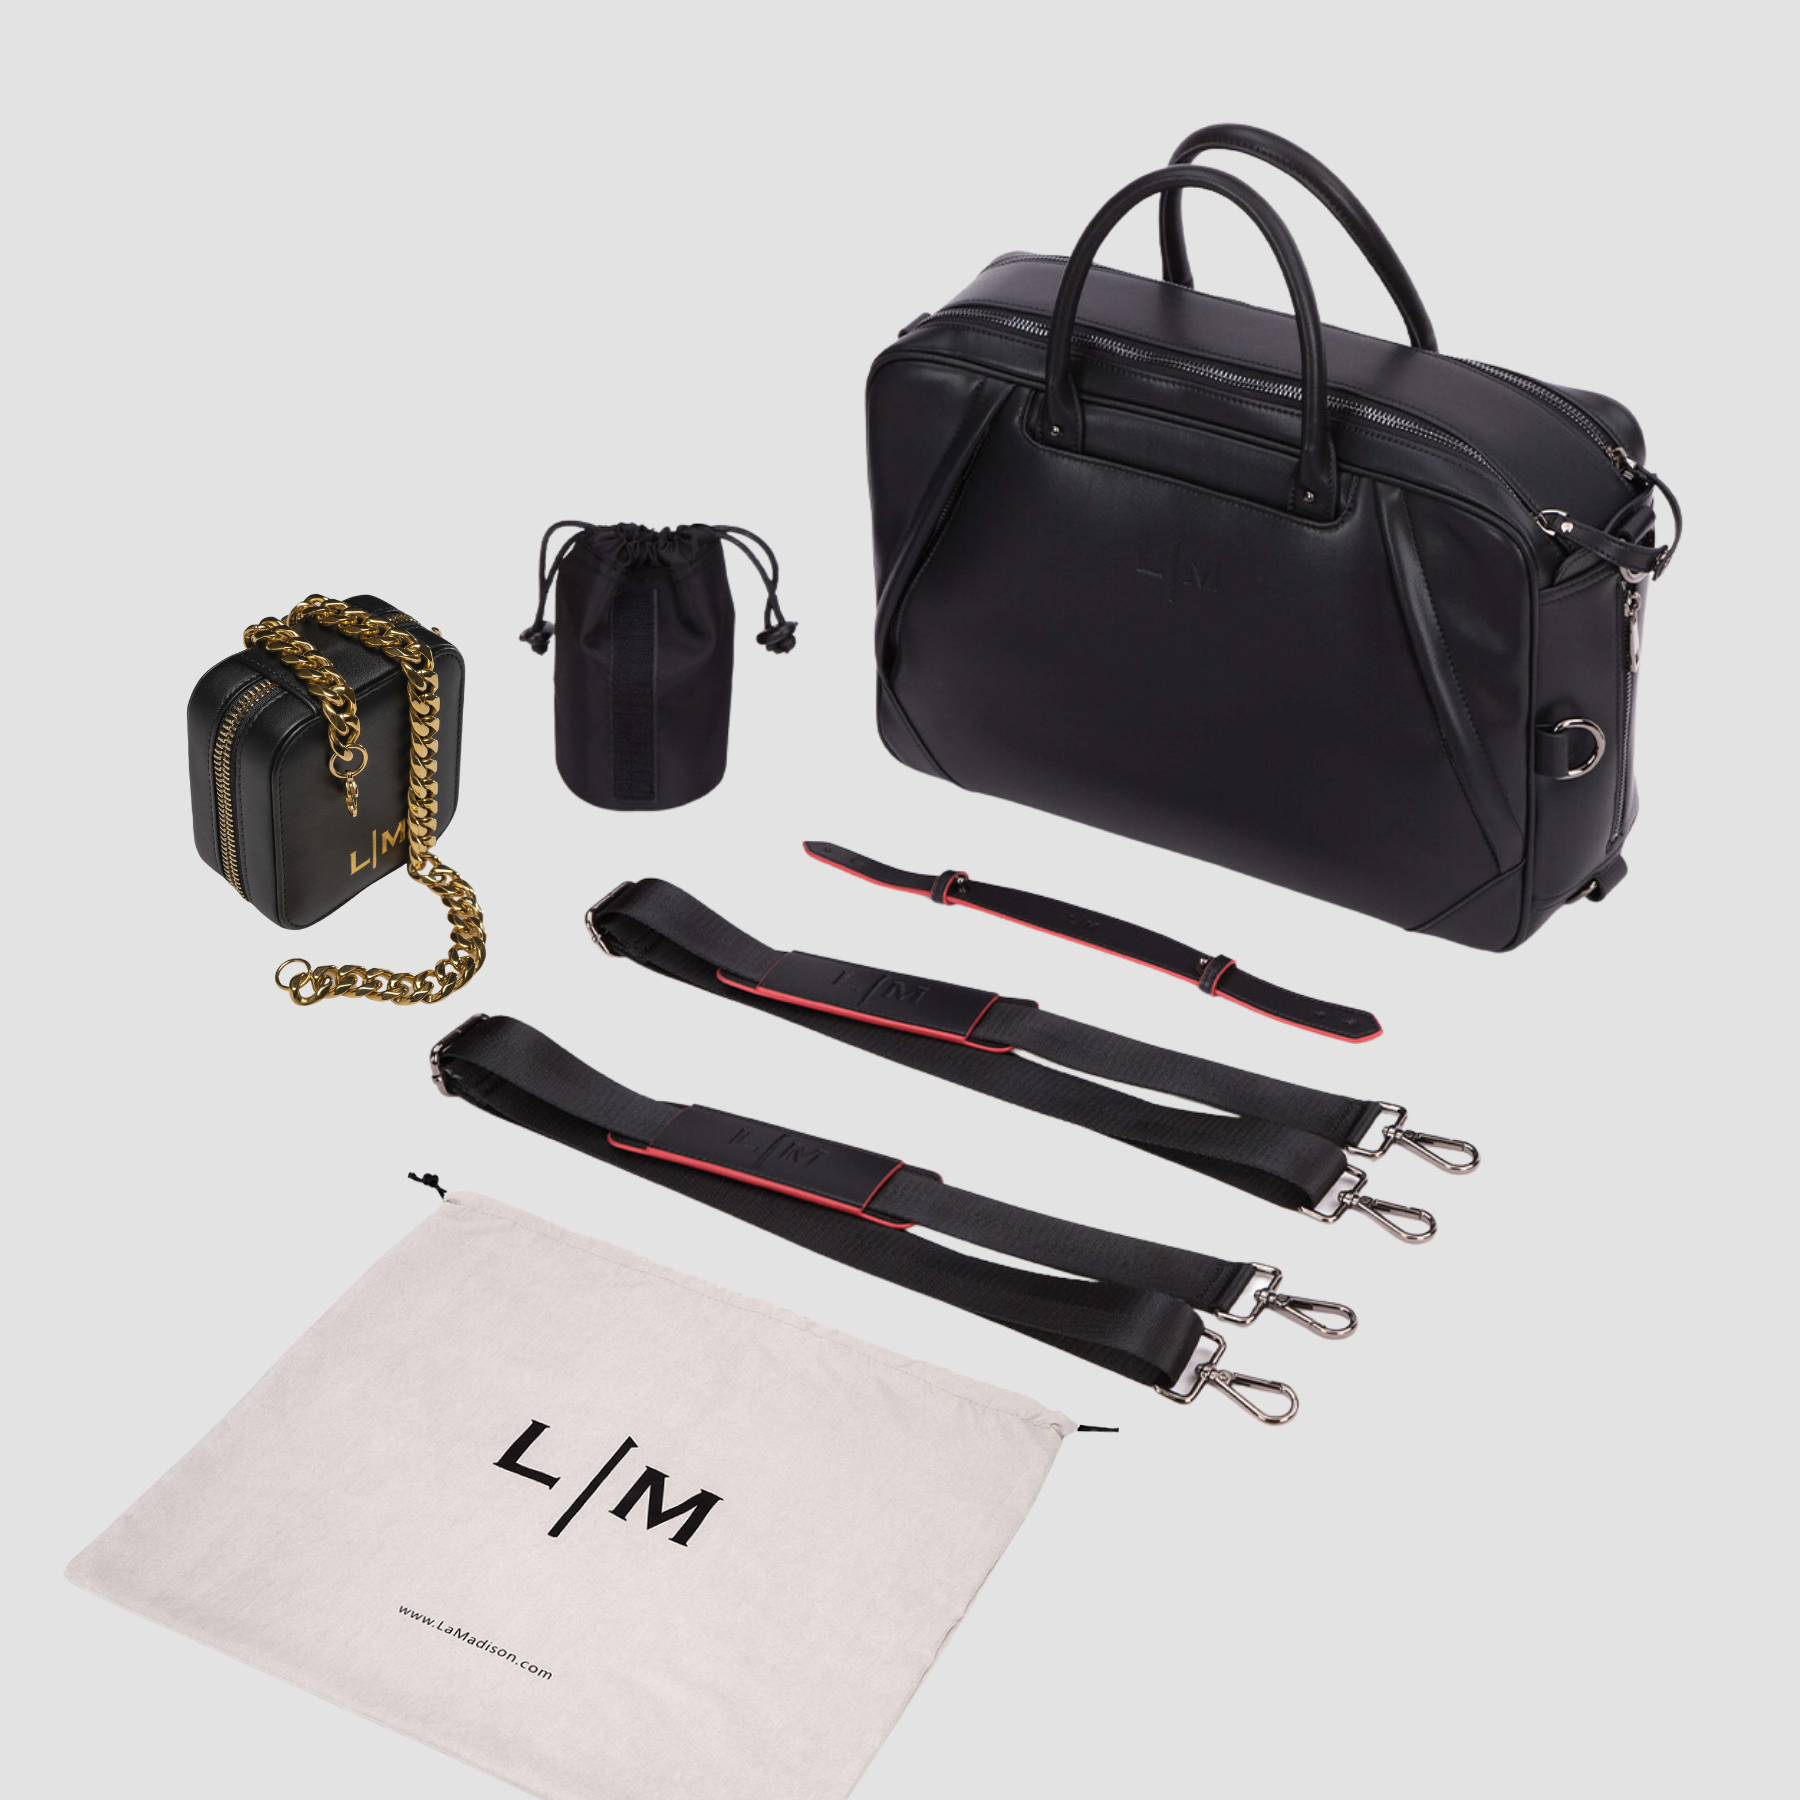 London BriefCase Convertible Bag + Free Gift